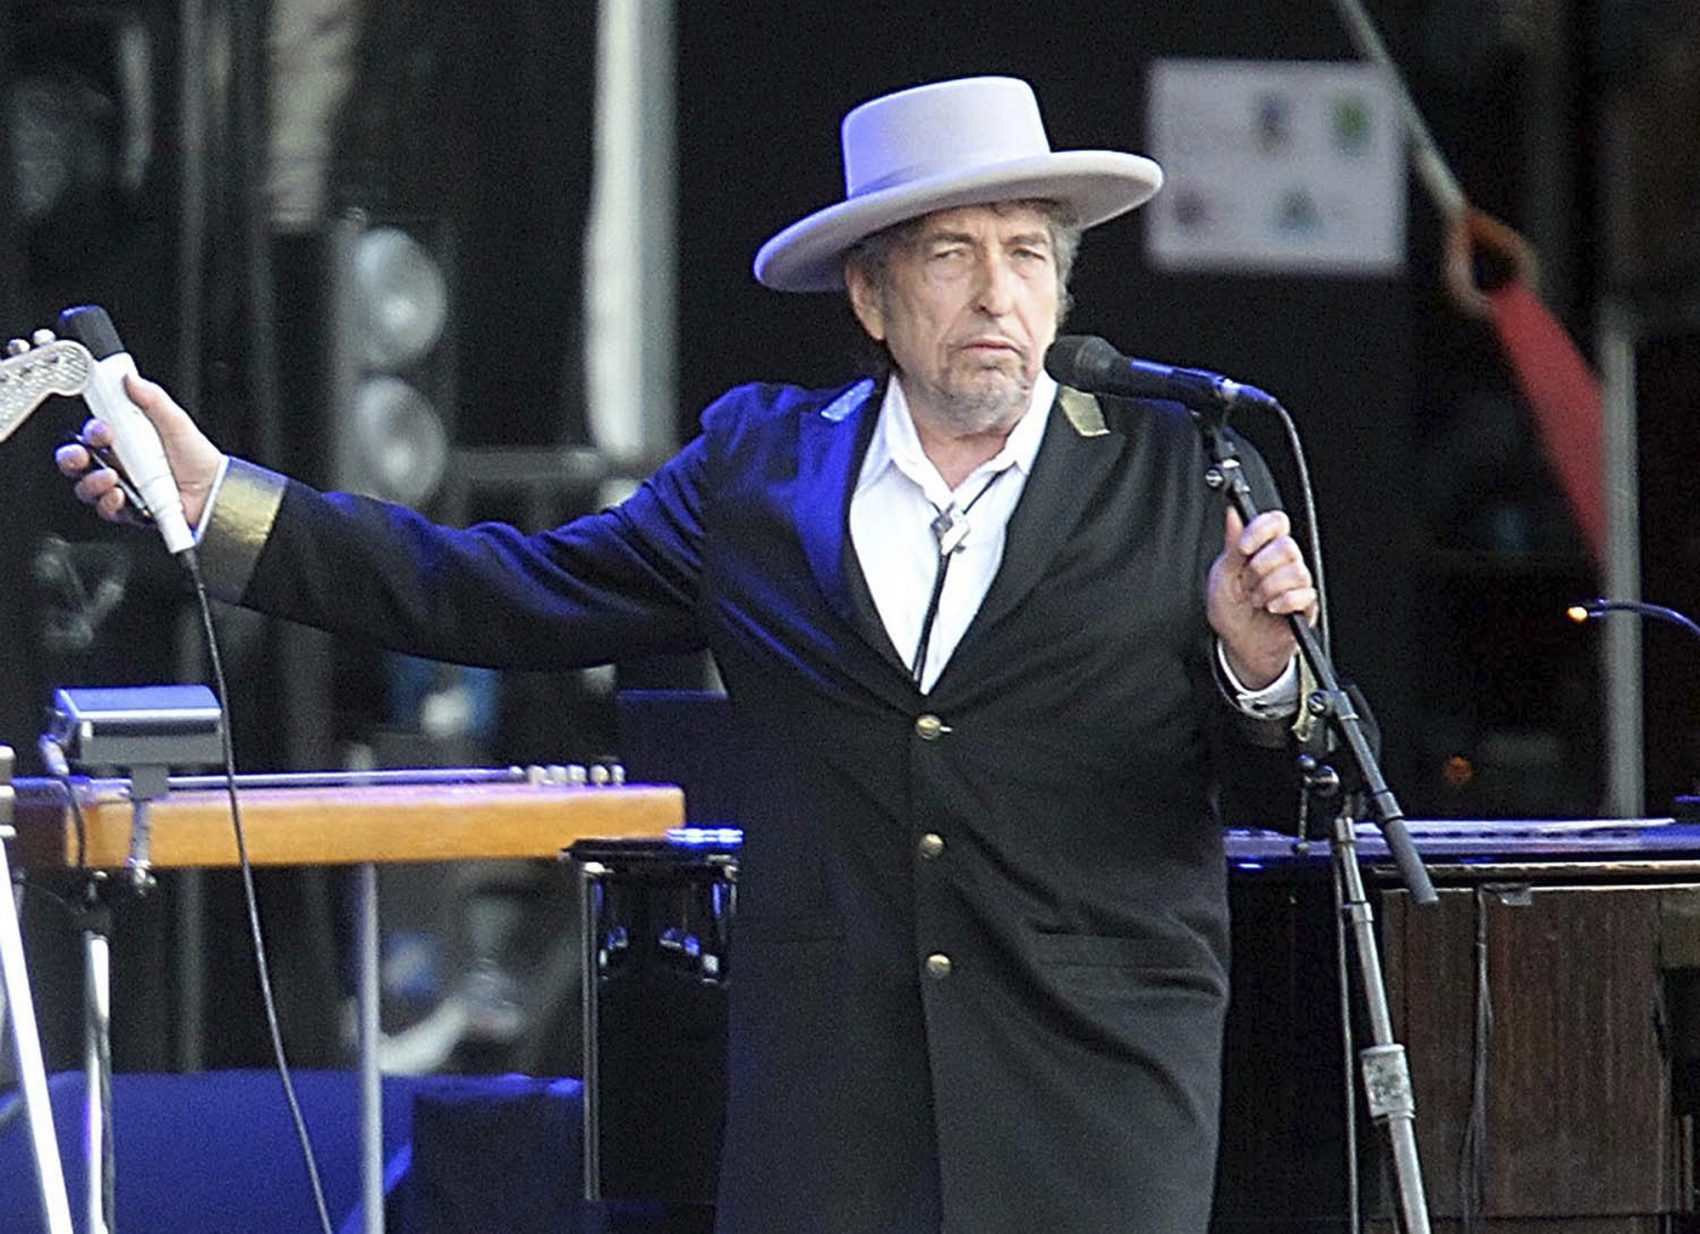 A lifetime of listening to Bob Dylan, writes Alex Green, tells me that this award makes no sense. Pictured: Bob Dylan performing onstage at &quot;Les Vieilles Charrues&quot; Festival in Carhaix, western France in 2012. Dylan won the 2016 Nobel Prize in literature, announced Thursday, Oct. 13, 2016. (David Vincent/AP)